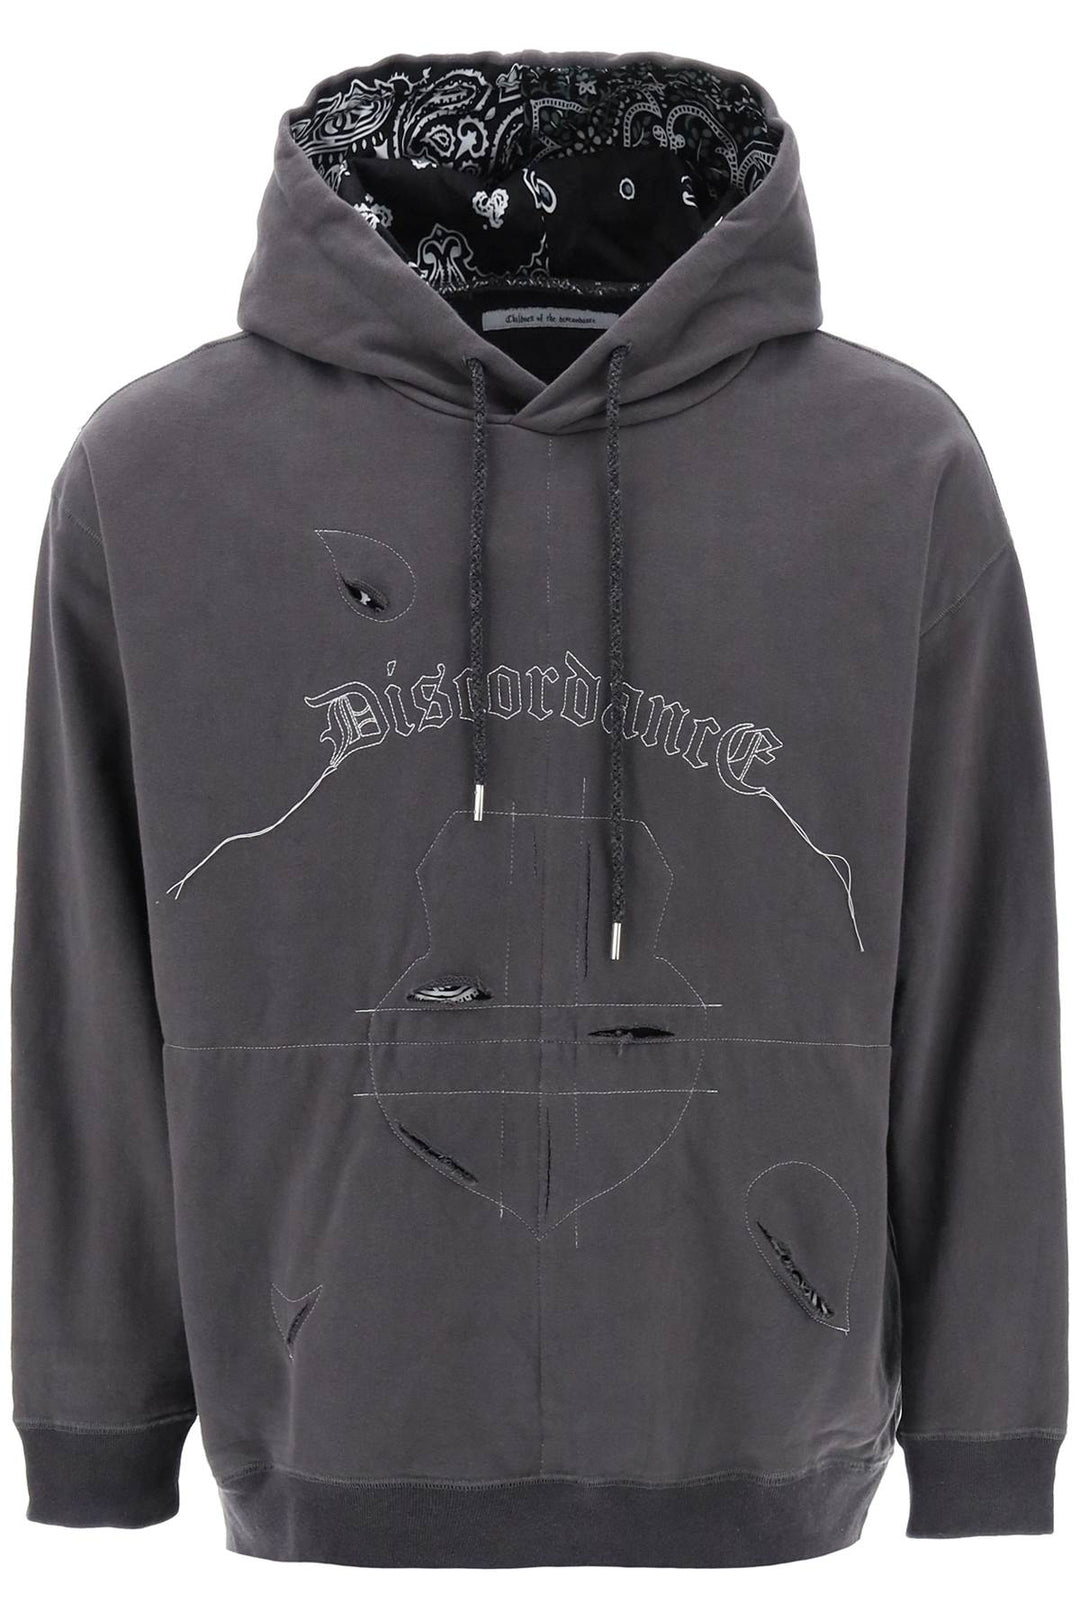 Children of the discordance hoodie with bandana detailing-0